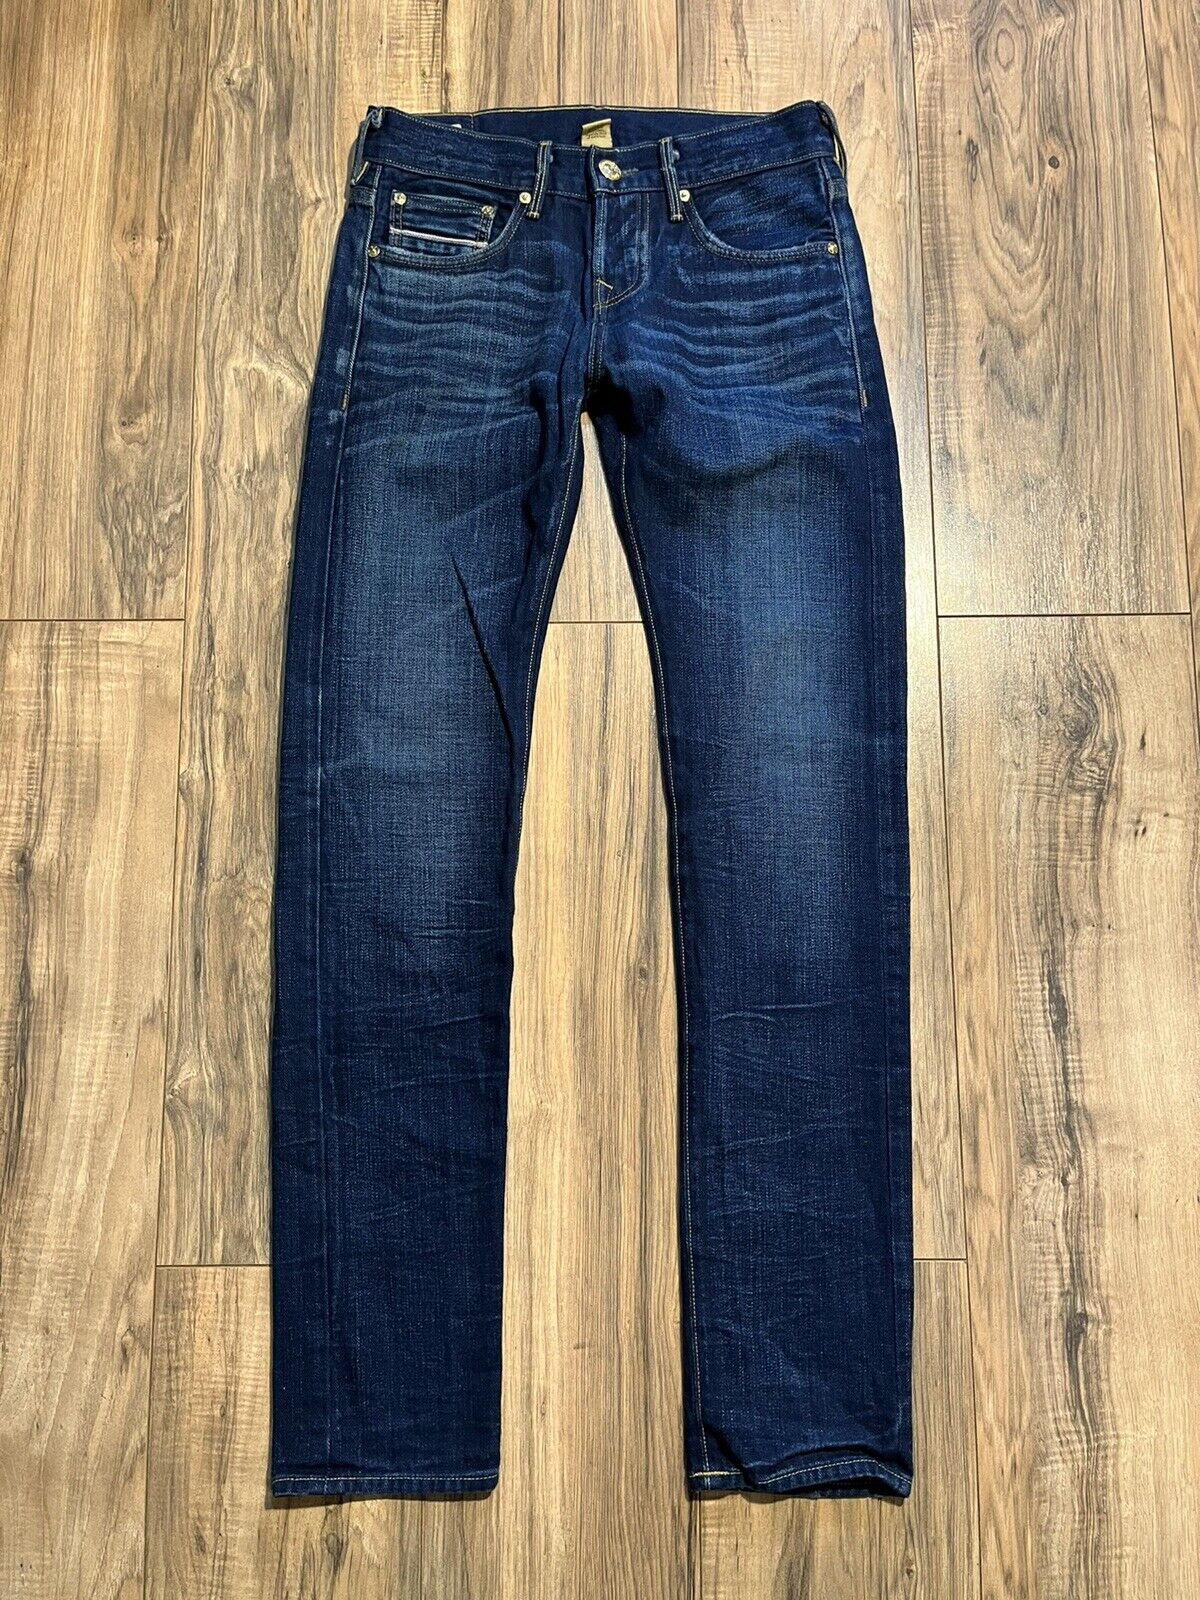 TRUE 絶品 RELIGION'ROCCO Skinny Button 上質 Fly Limited Sz 28 Selvedge Jeans Edition